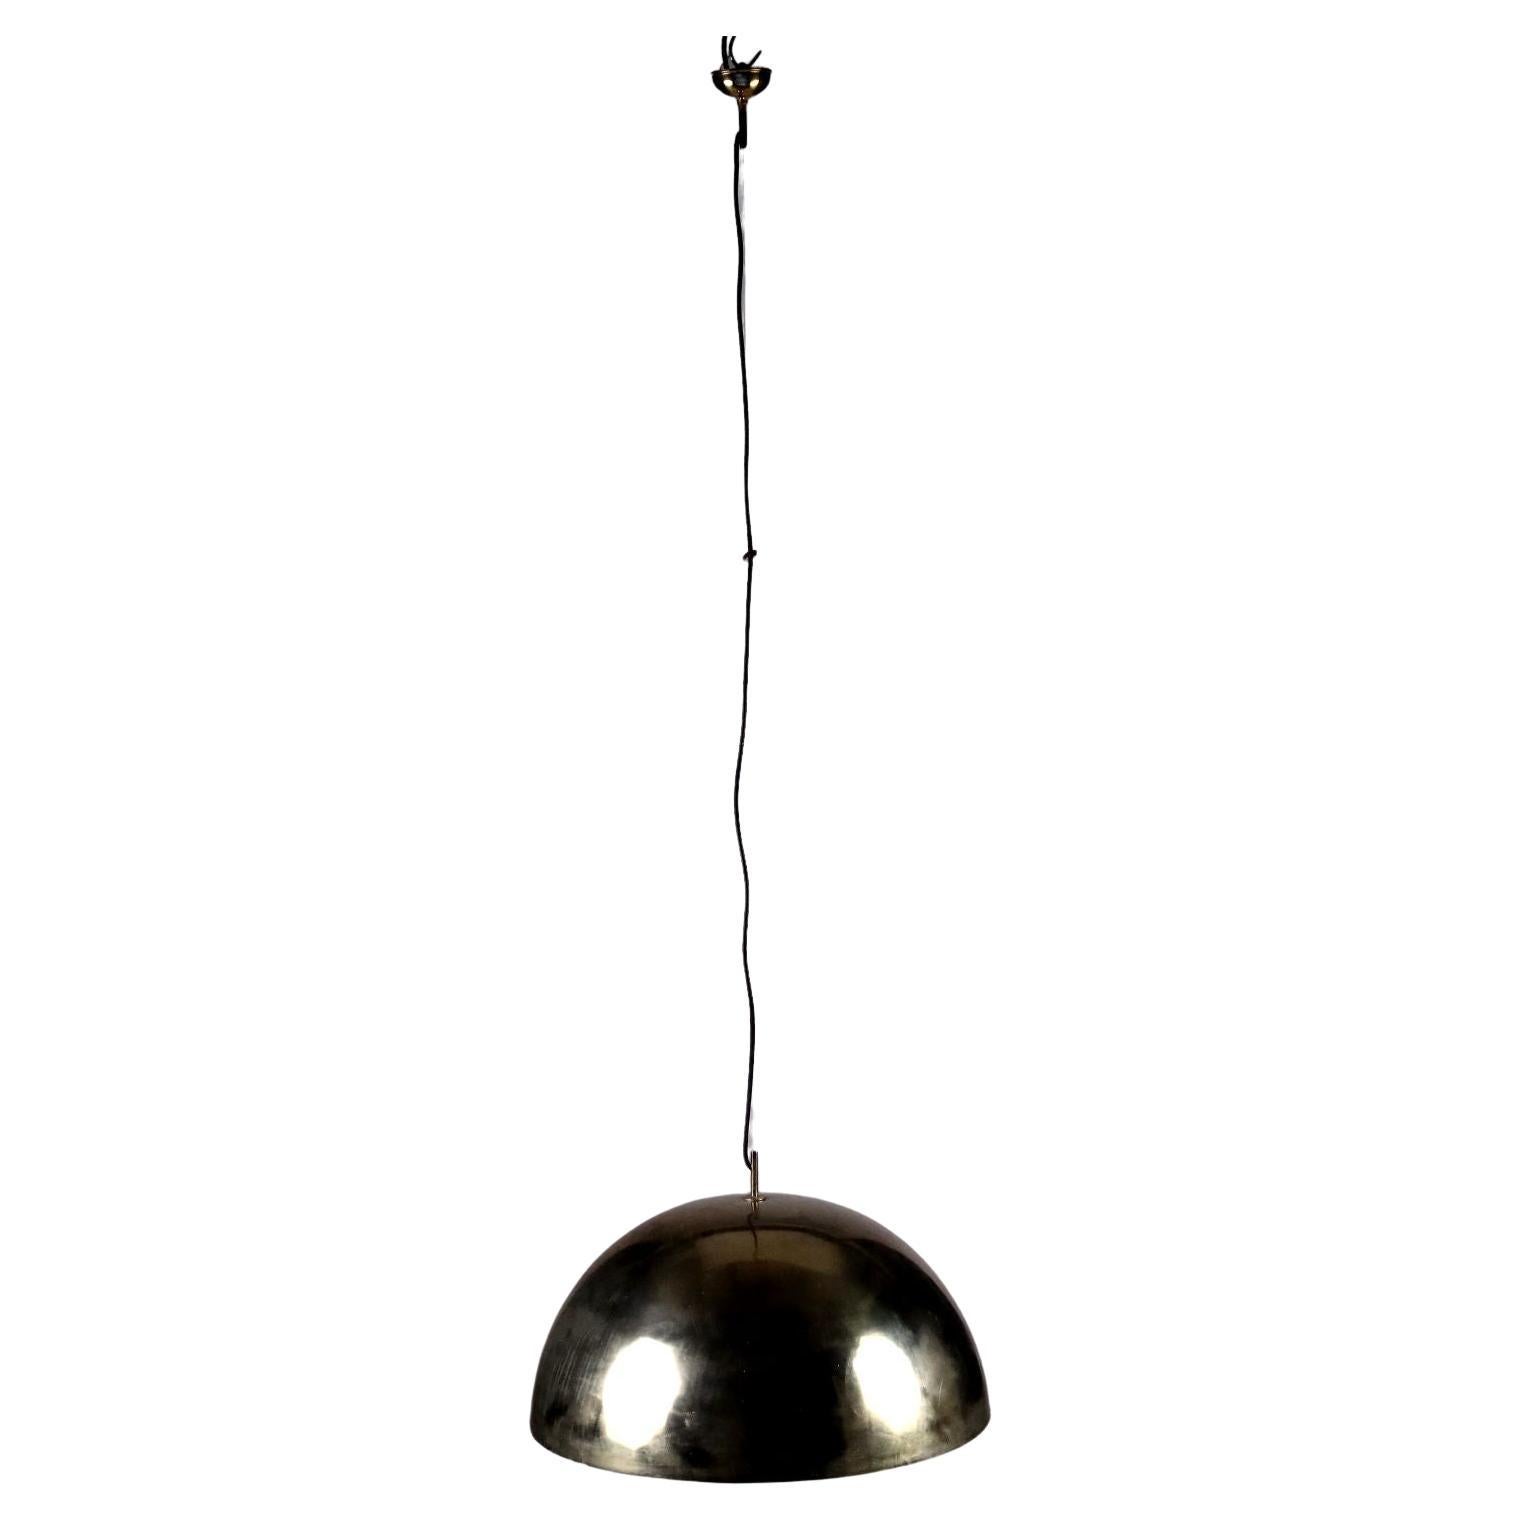 70s-80s ceiling lamp For Sale